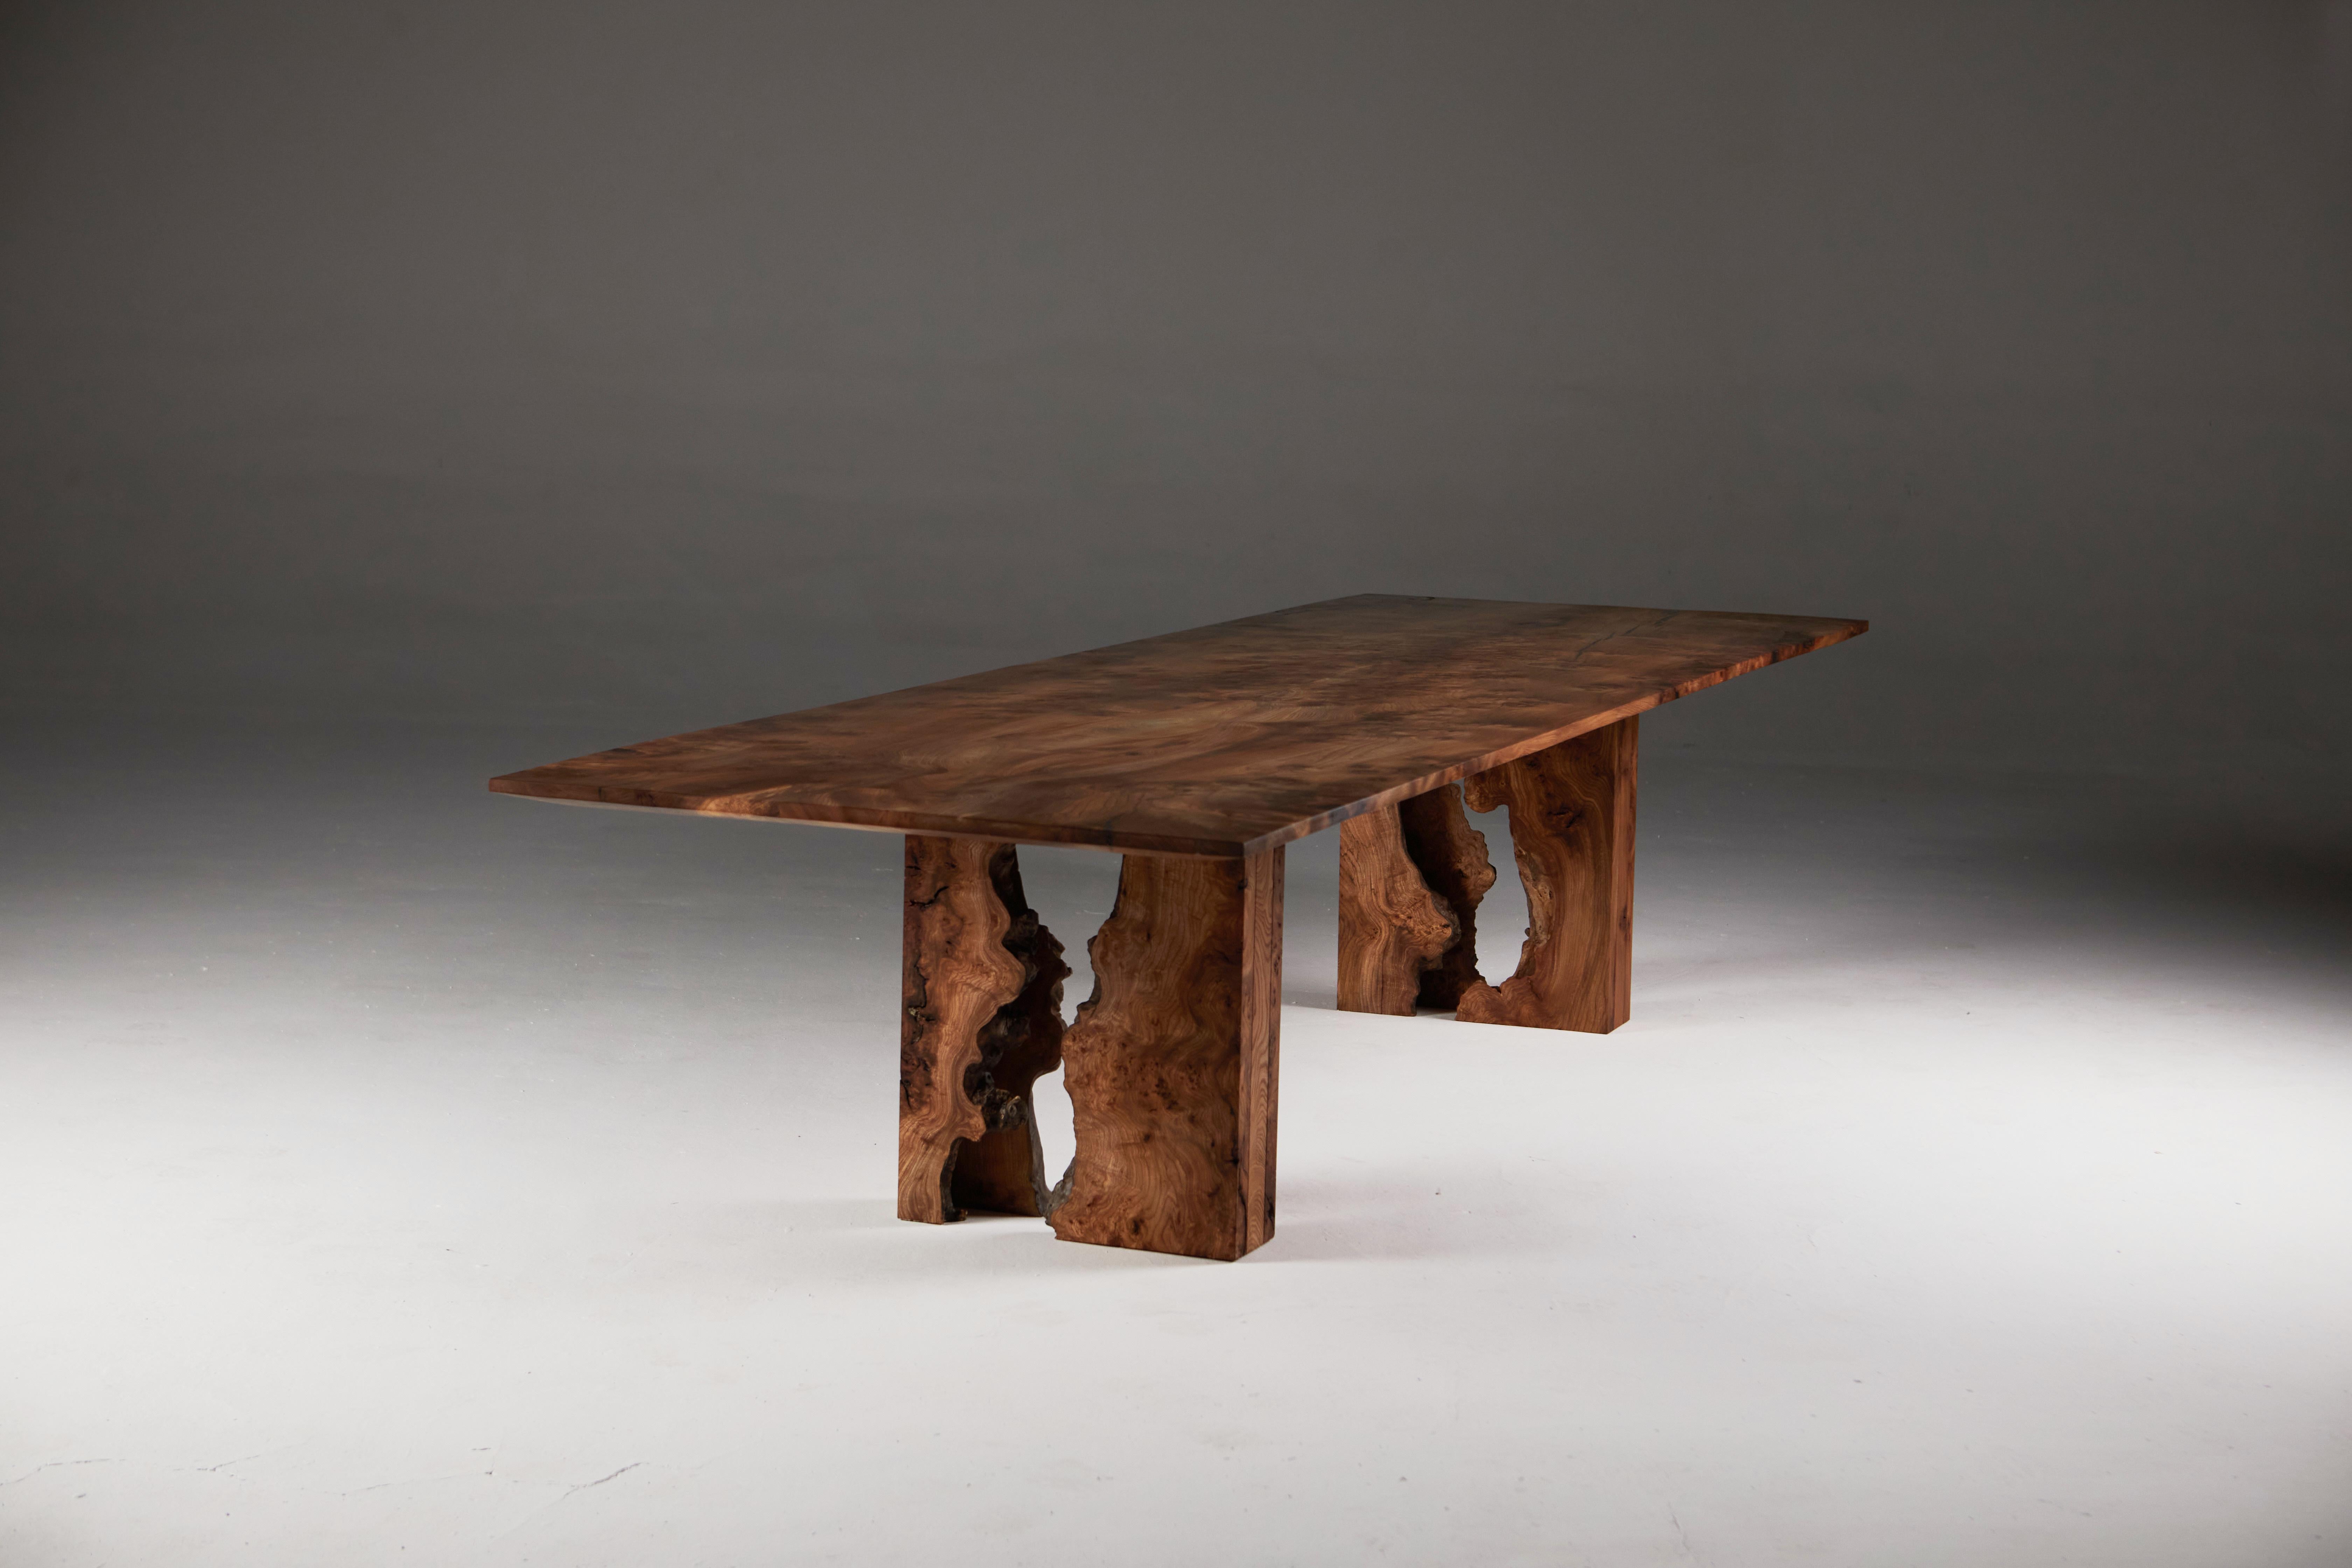 Scottish Burr Elm Table with Inverted Live Edge Legs and Book-matched Top.  1